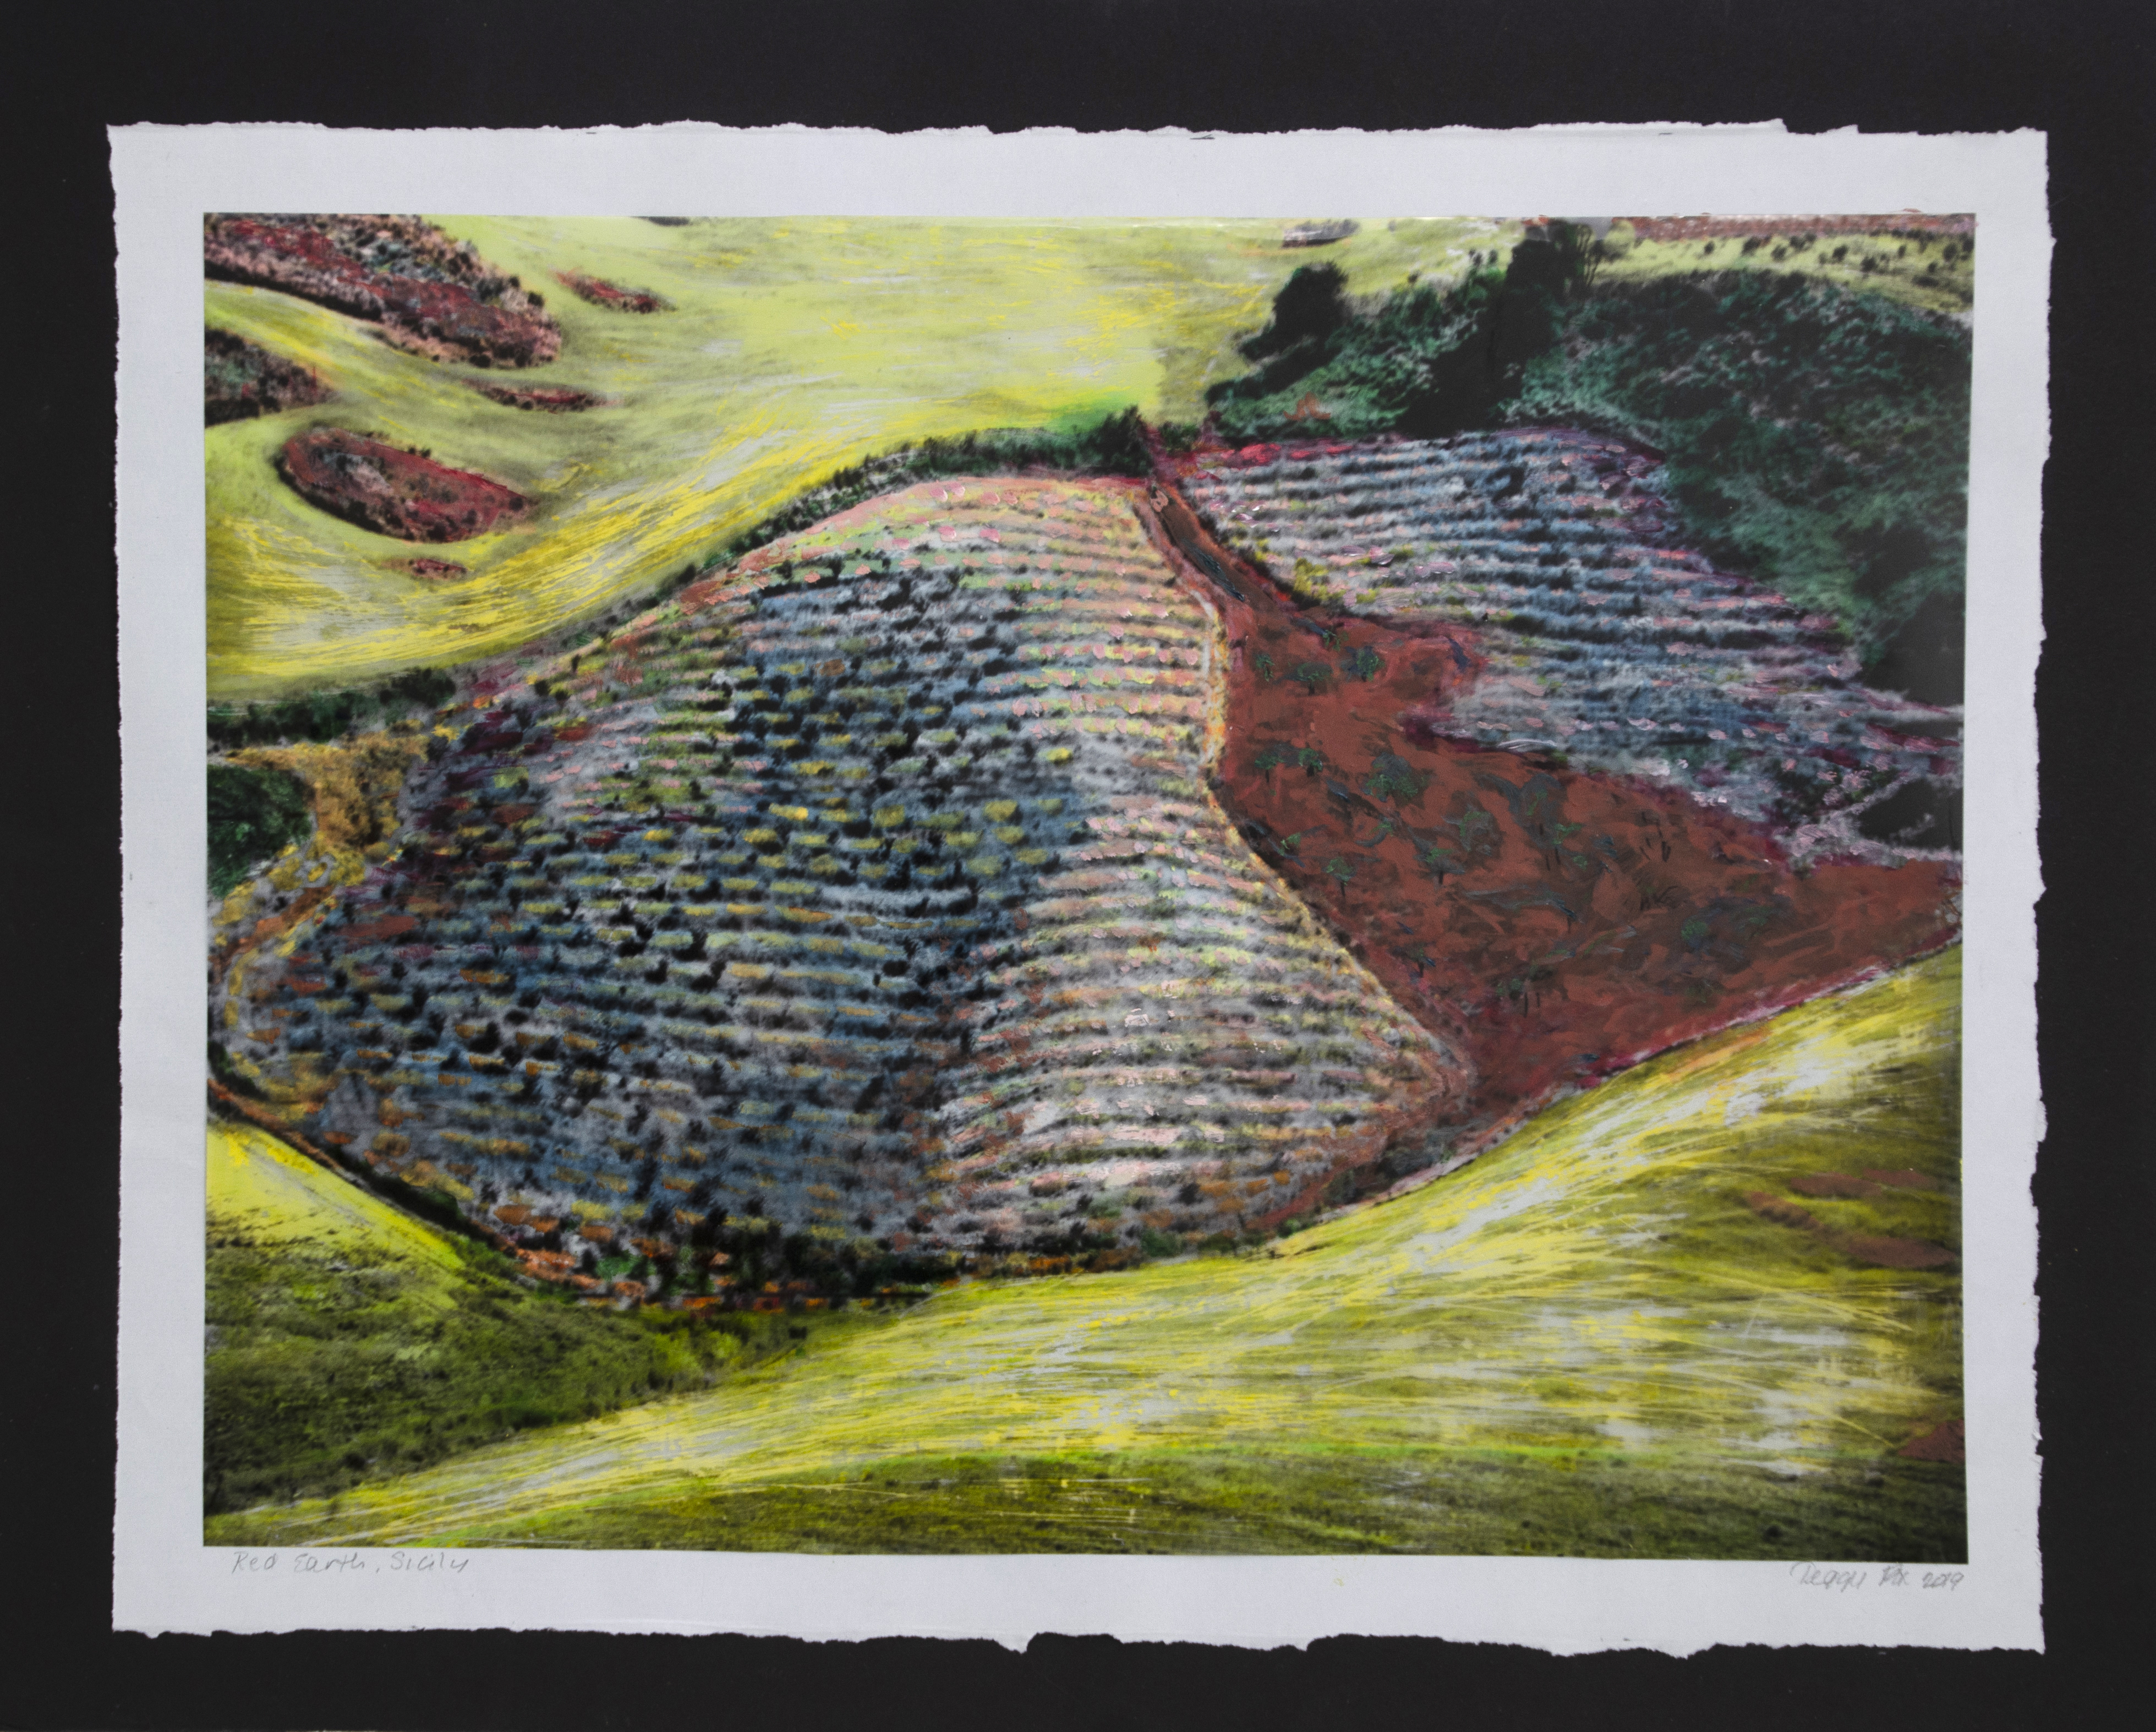 Red Earth Sicily, painted transparency on colored paper mounted on black foamcore